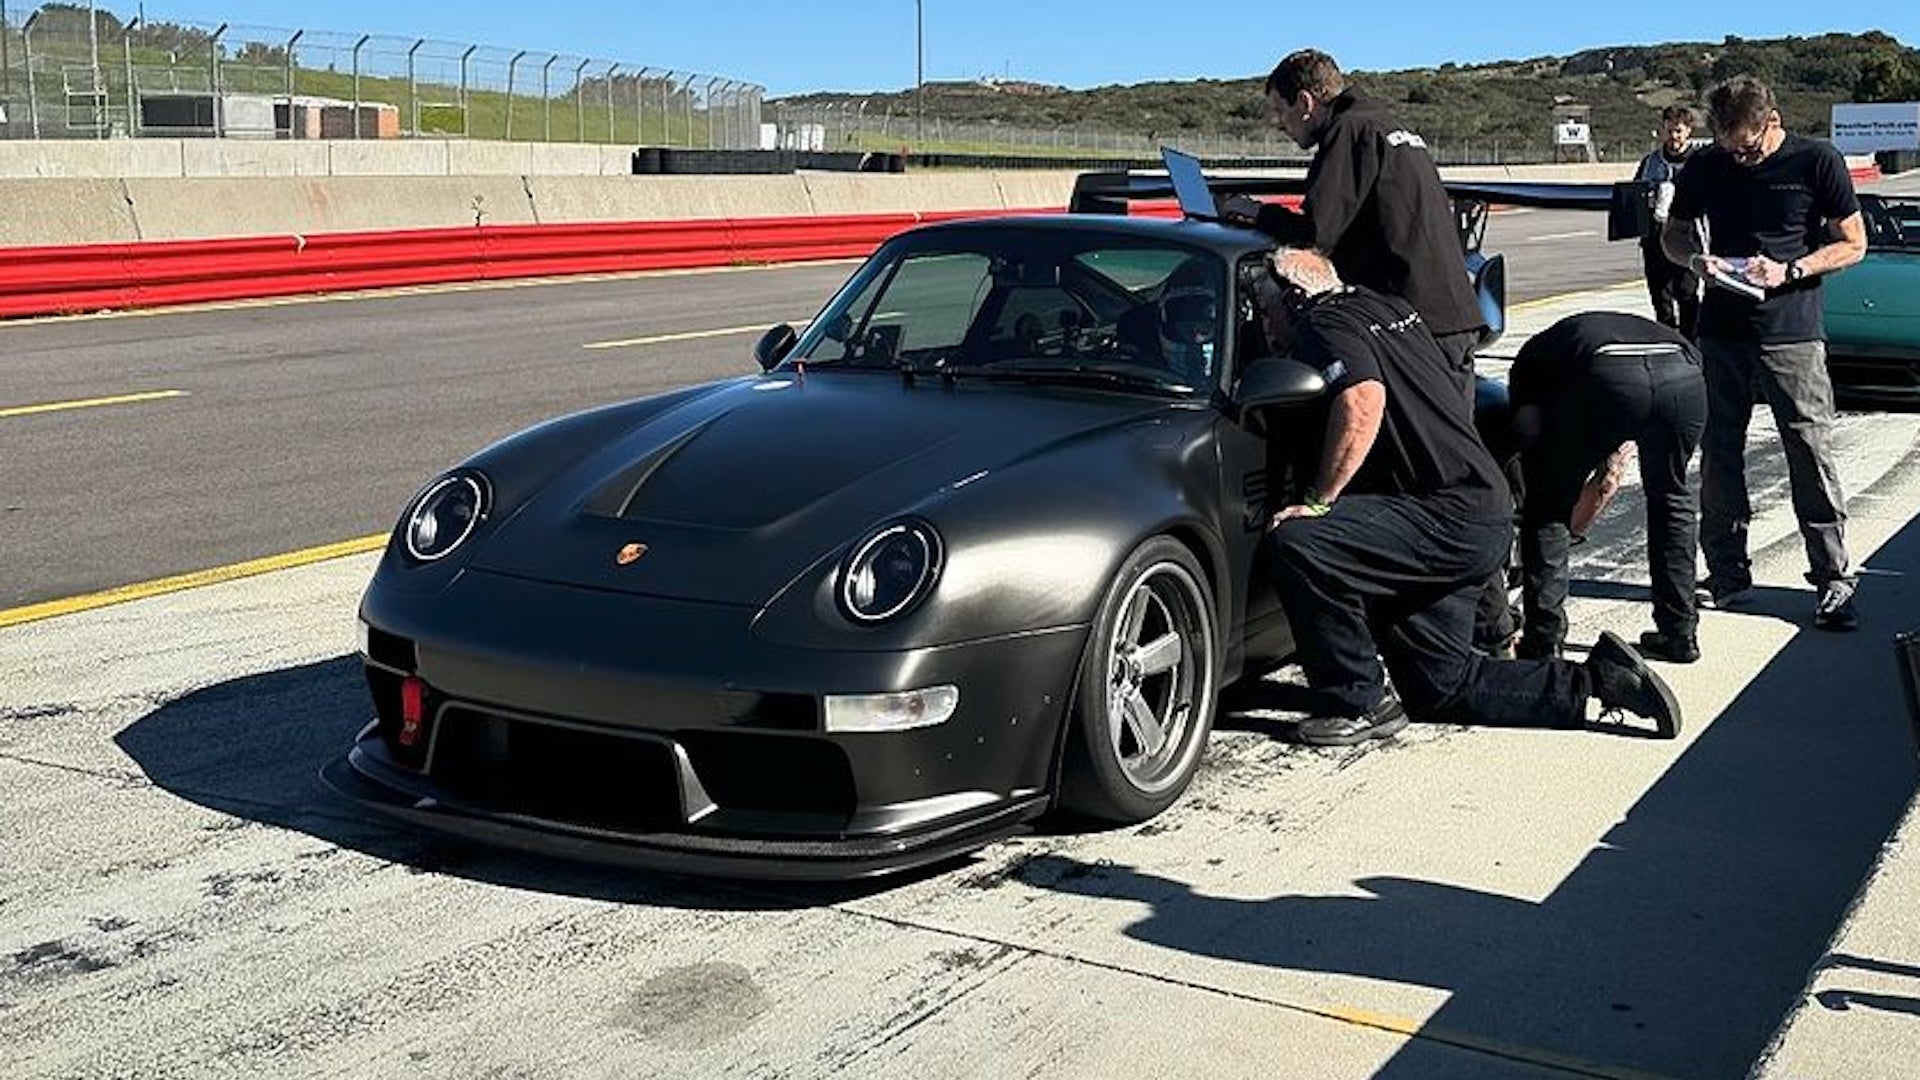 Driver escapes unscathed from rollover in Gunther Werks Porsche 911 Turbo prototype at Laguna Seca.